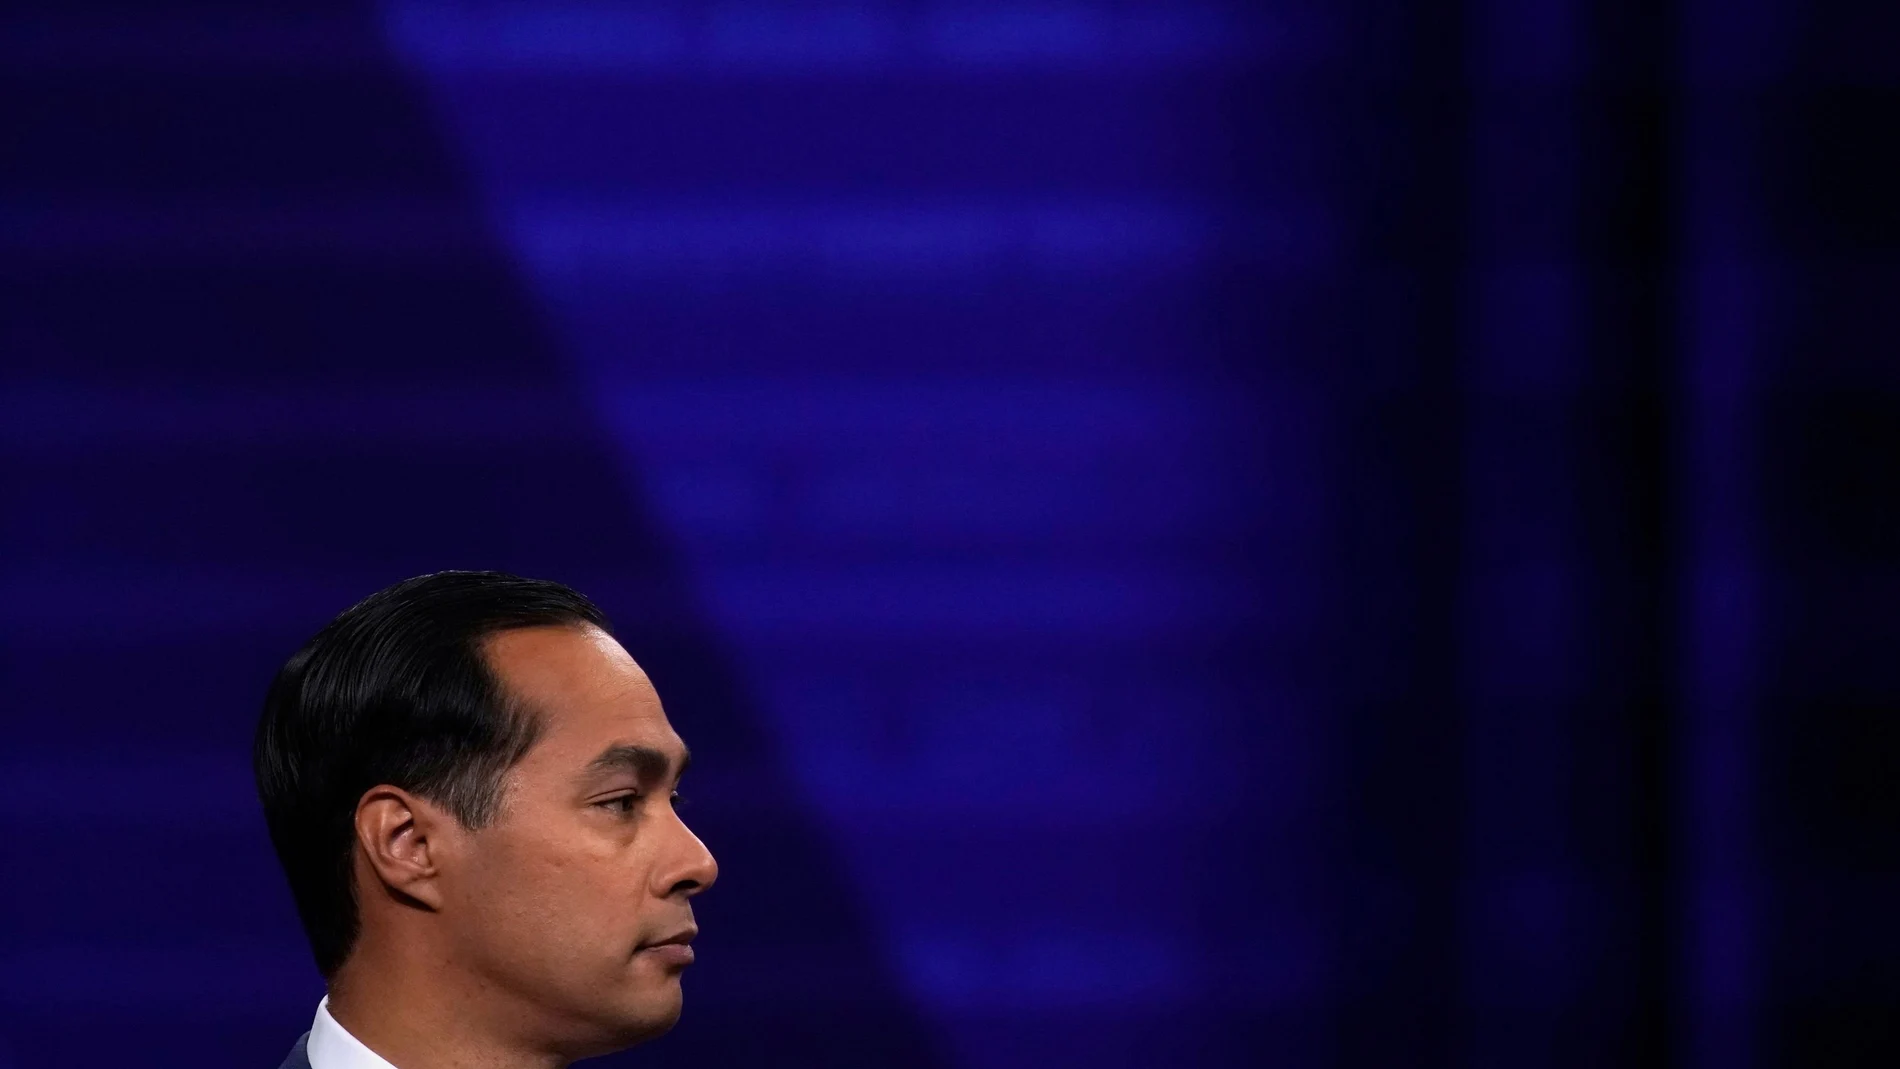 FILE PHOTO: FILE PHOTO: Democratic 2020 U.S. presidential candidate Julian Castro takes part during a televised townhall on CNN dedicated to LGBTQ issues in Los Angeles, California